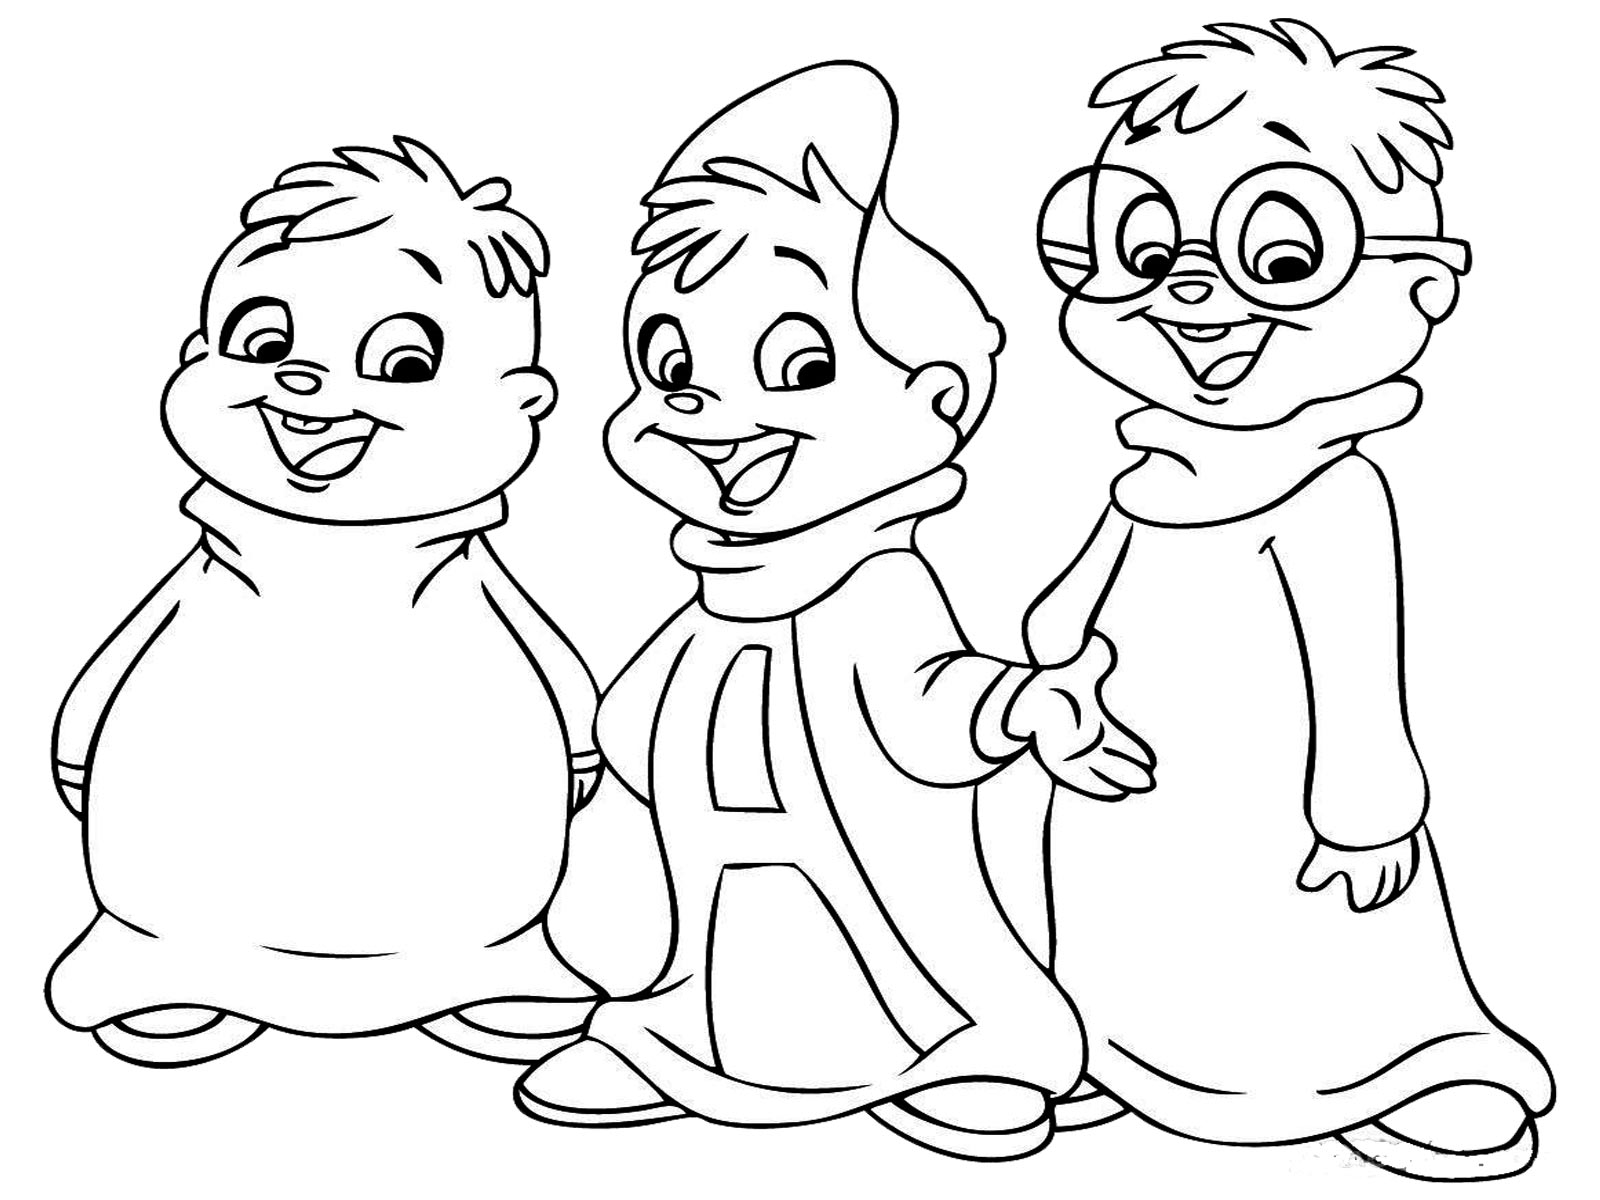 Three Friends - Free Coloring Image for Kids